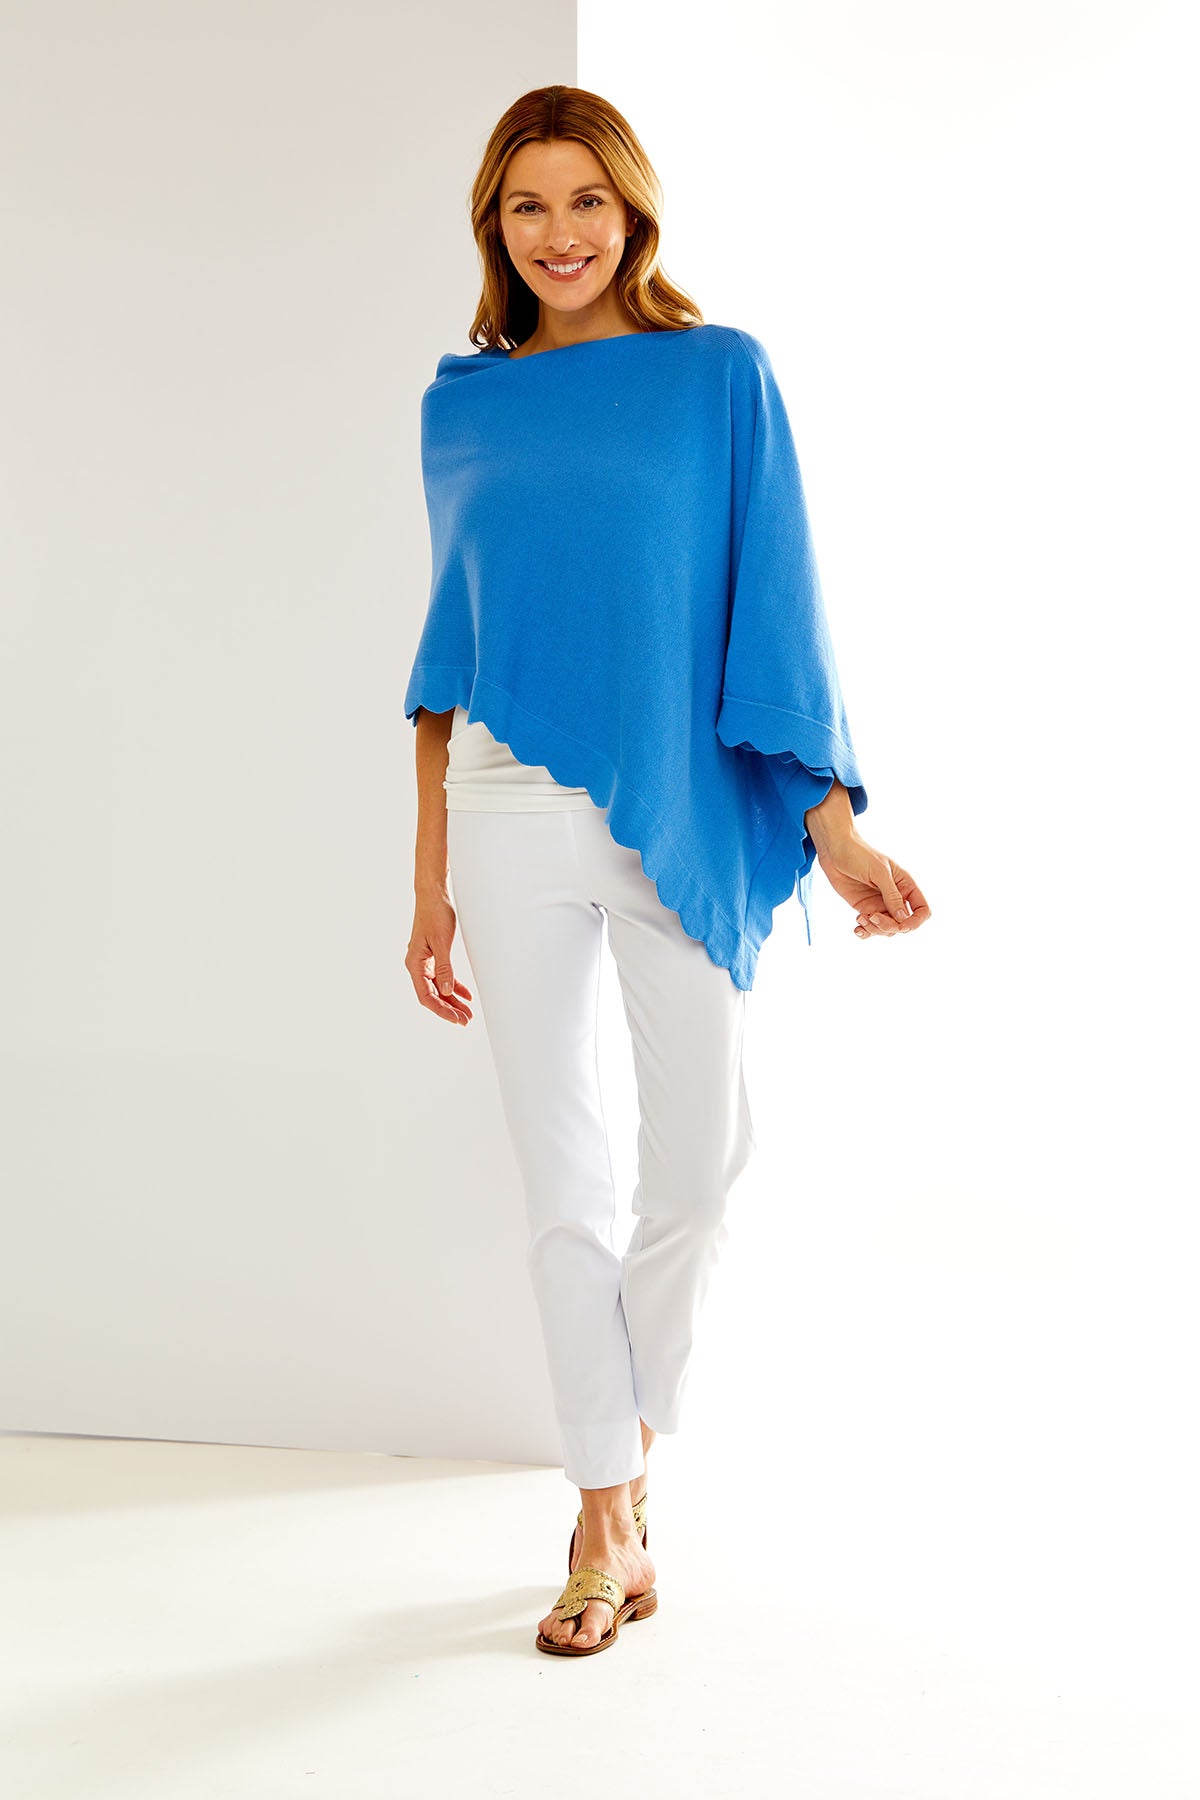 Woman in blue poncho with a scallop hemline